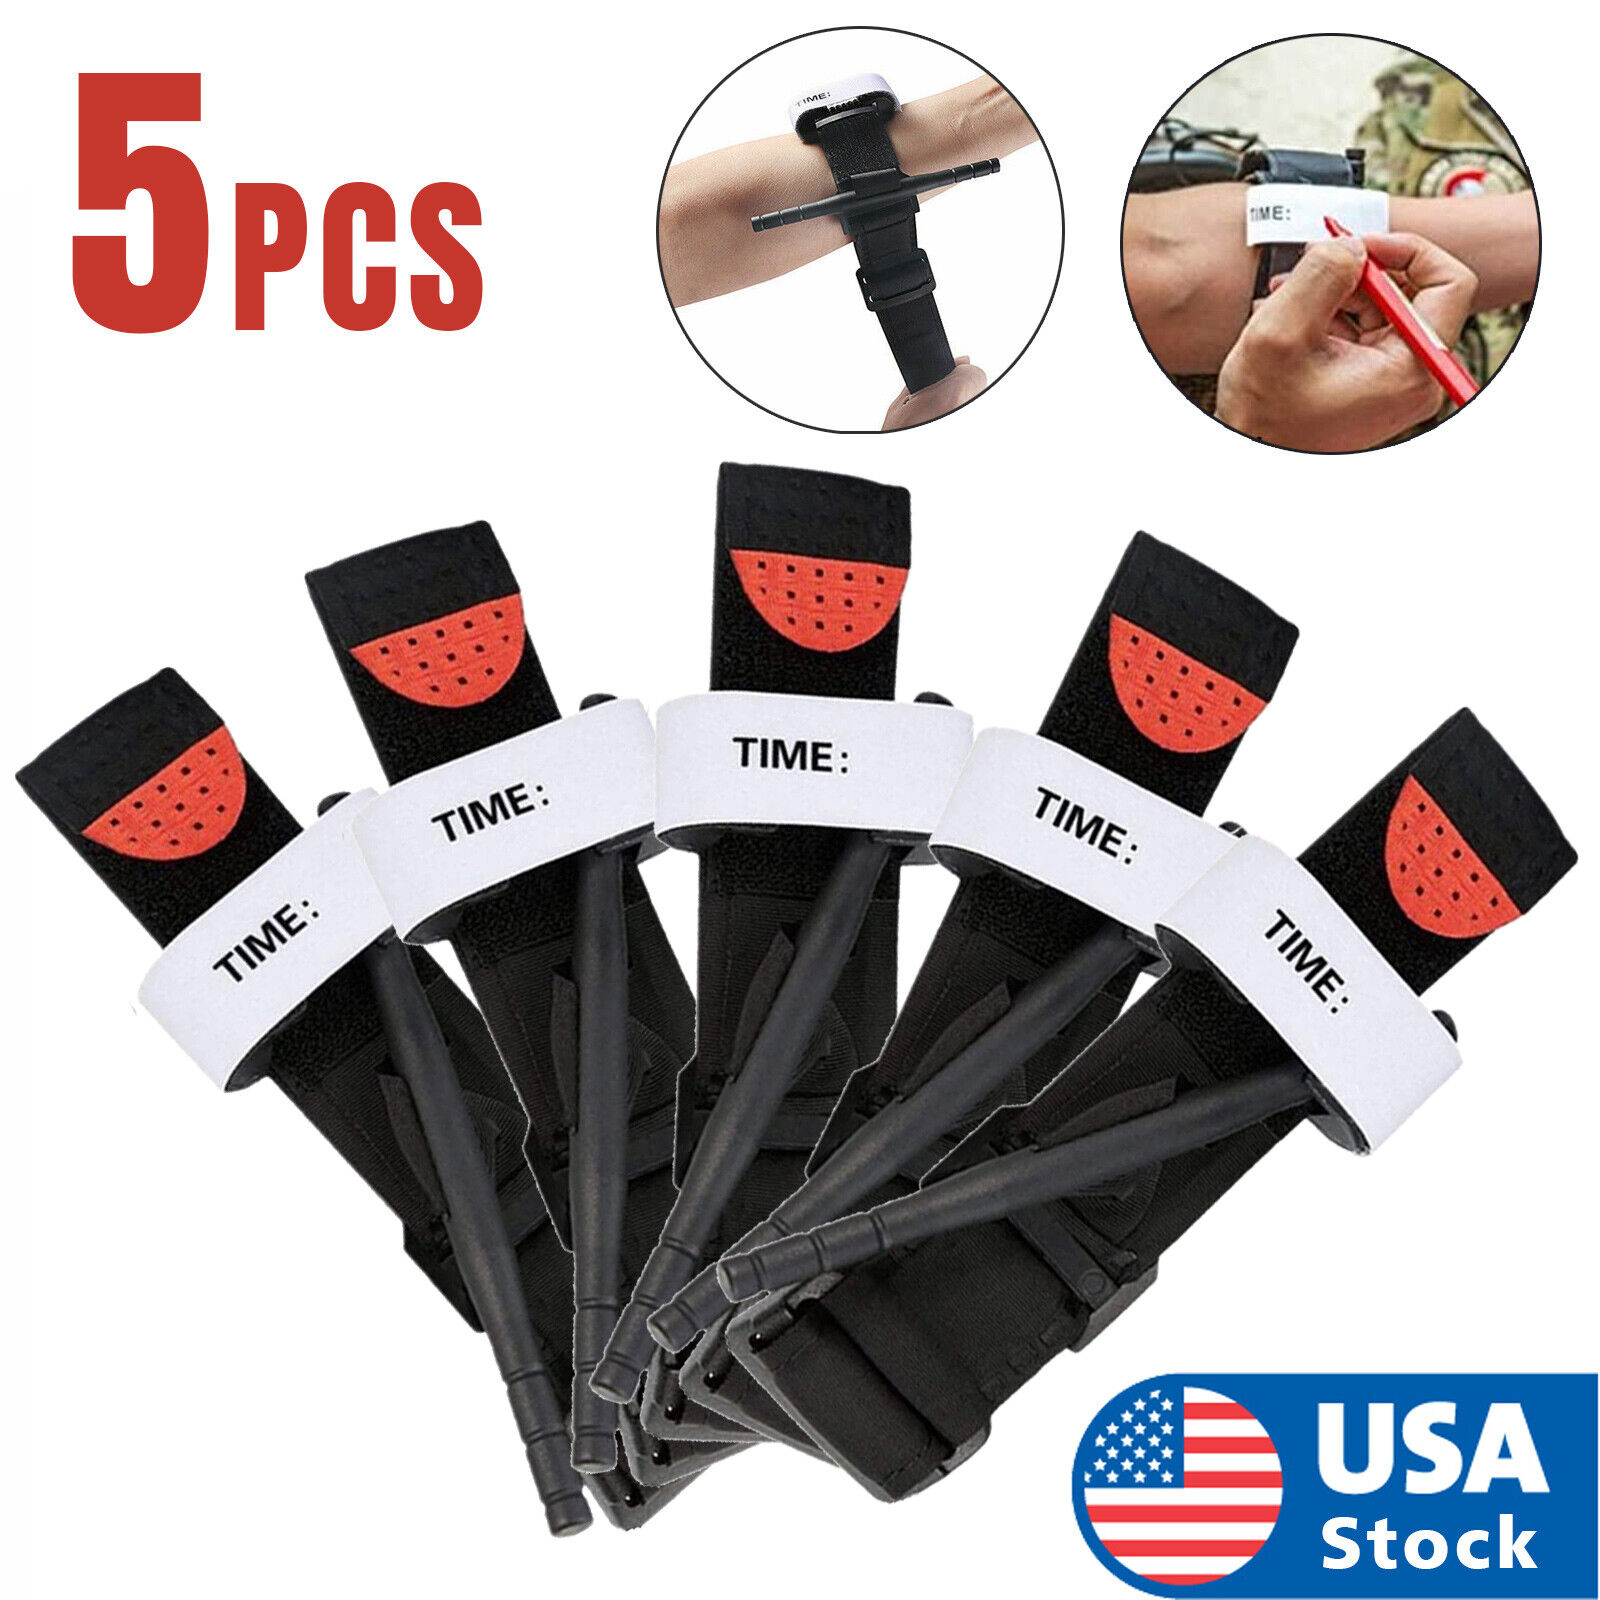 5Packs Tourniquet Rapid One Hand Application Emergency Outdoor First Aid Kit USA